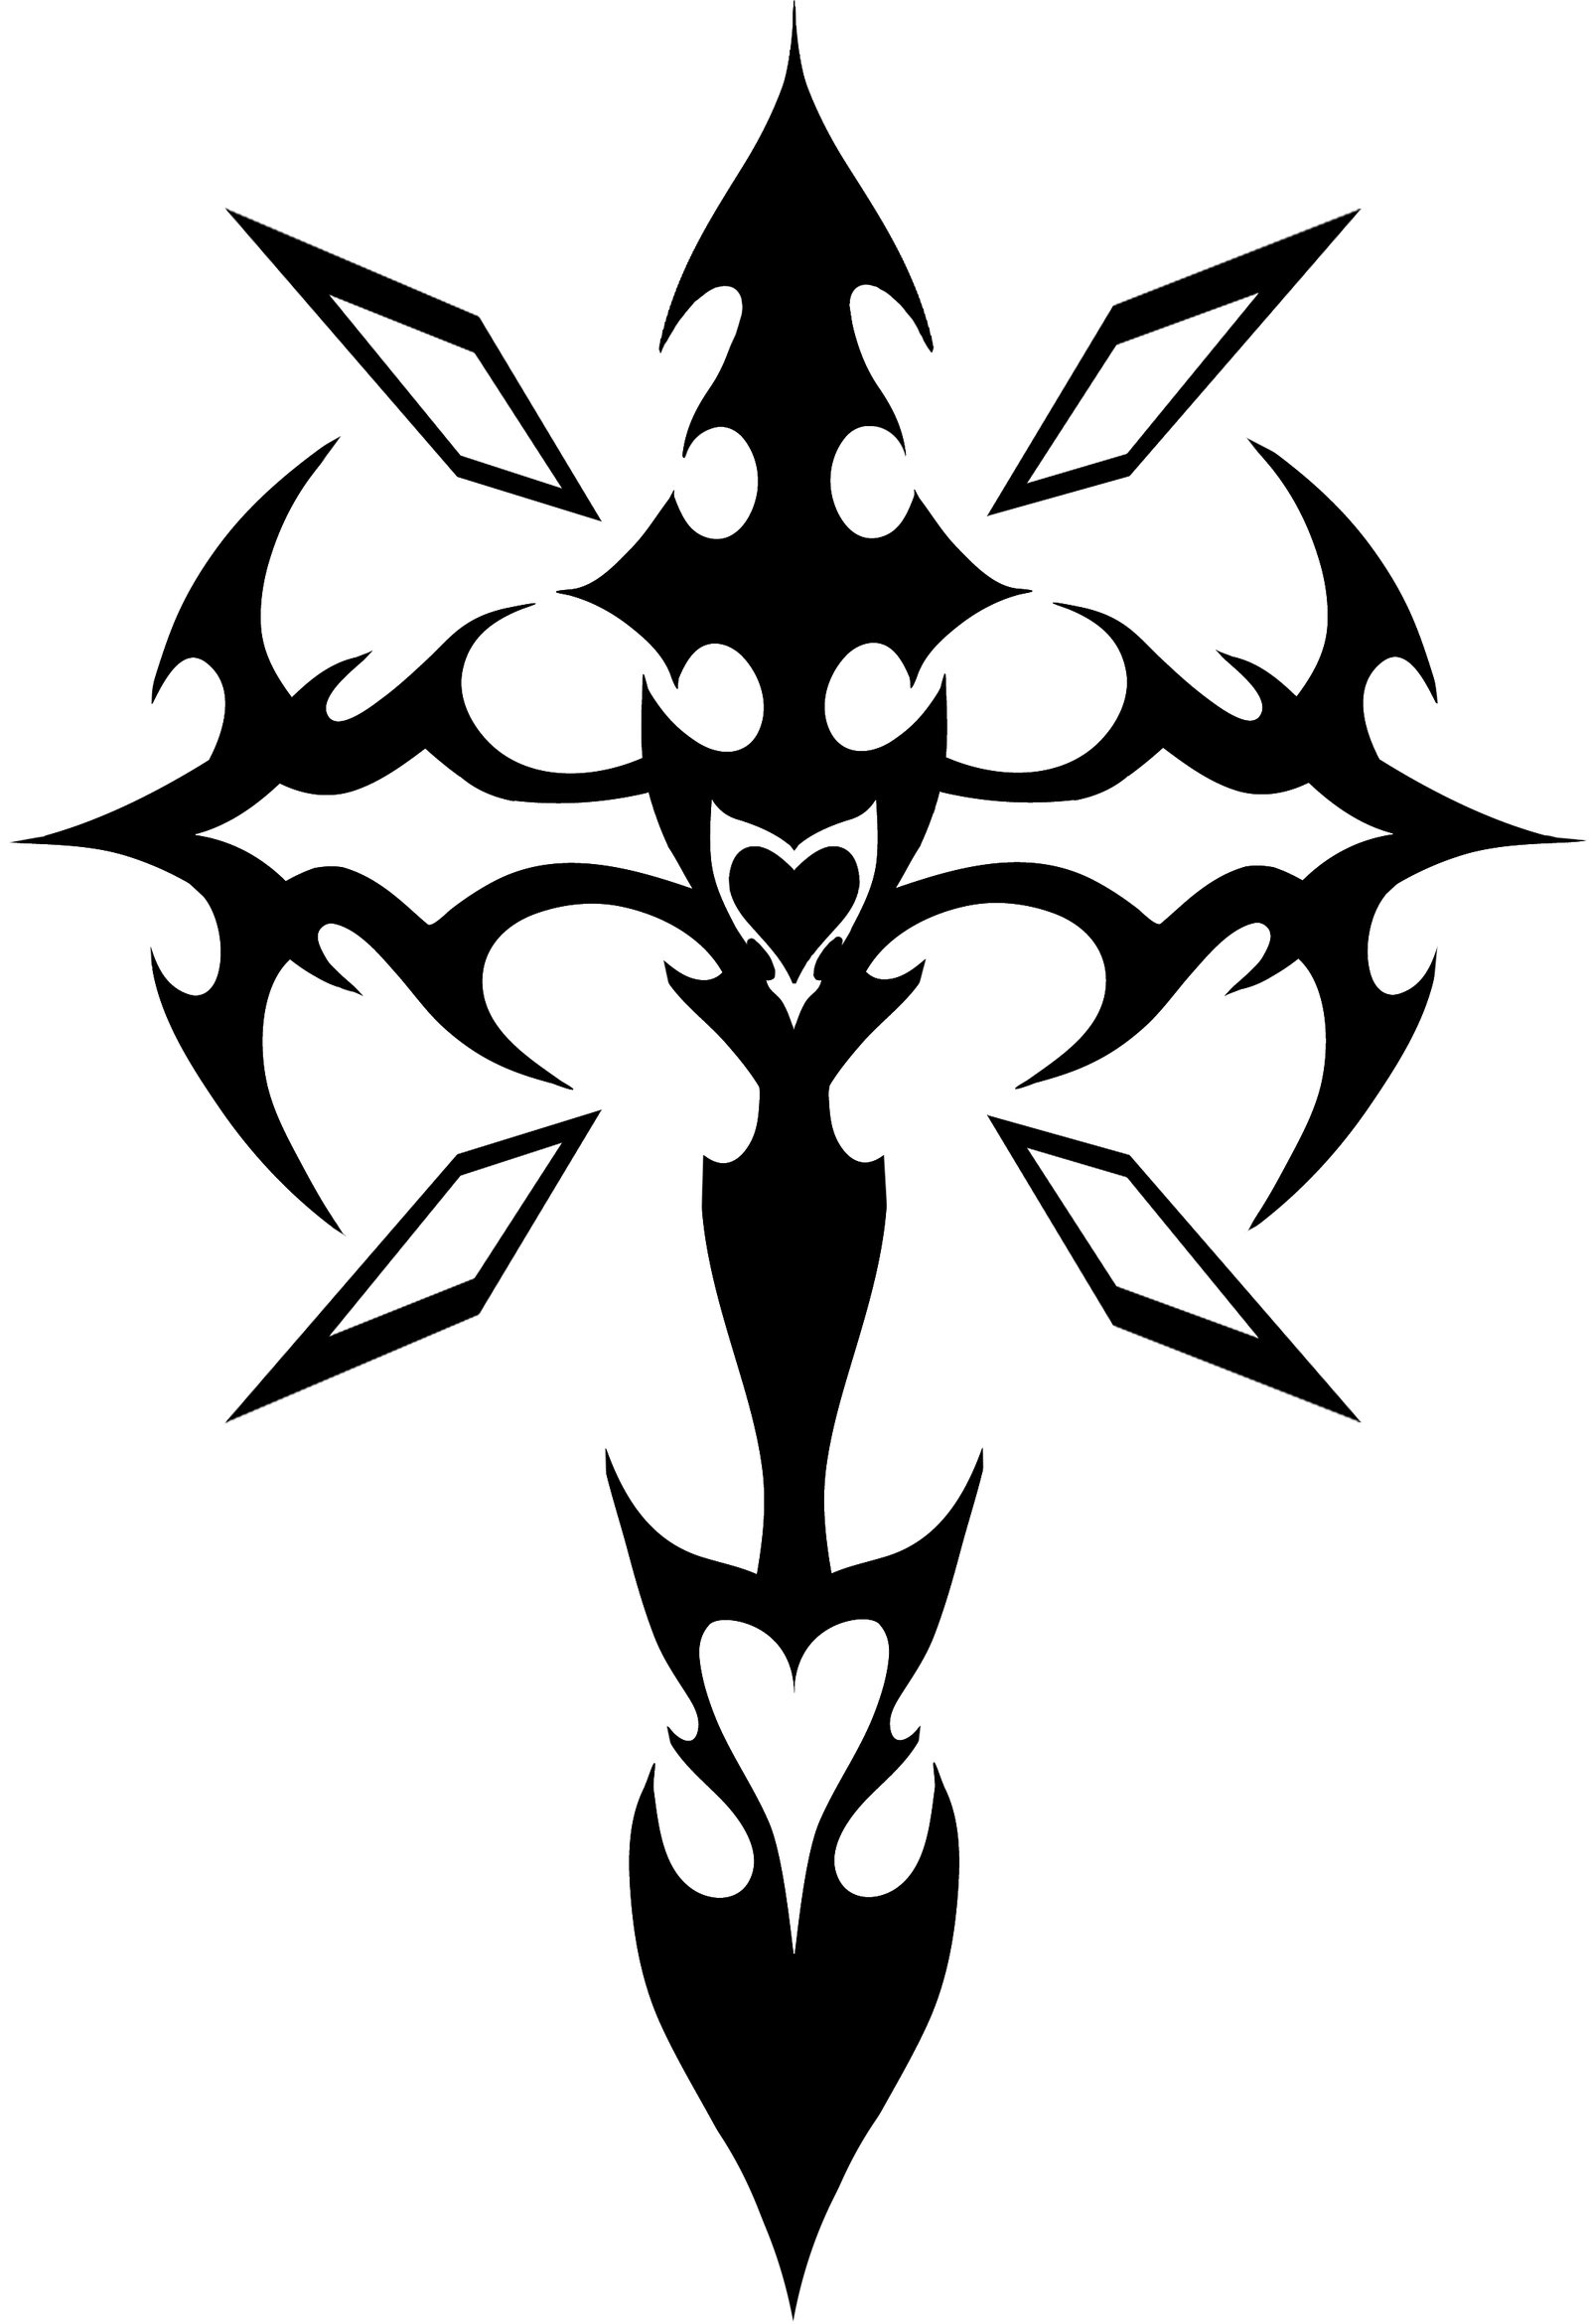 Cool Cross Designs To Draw - ClipArt Best